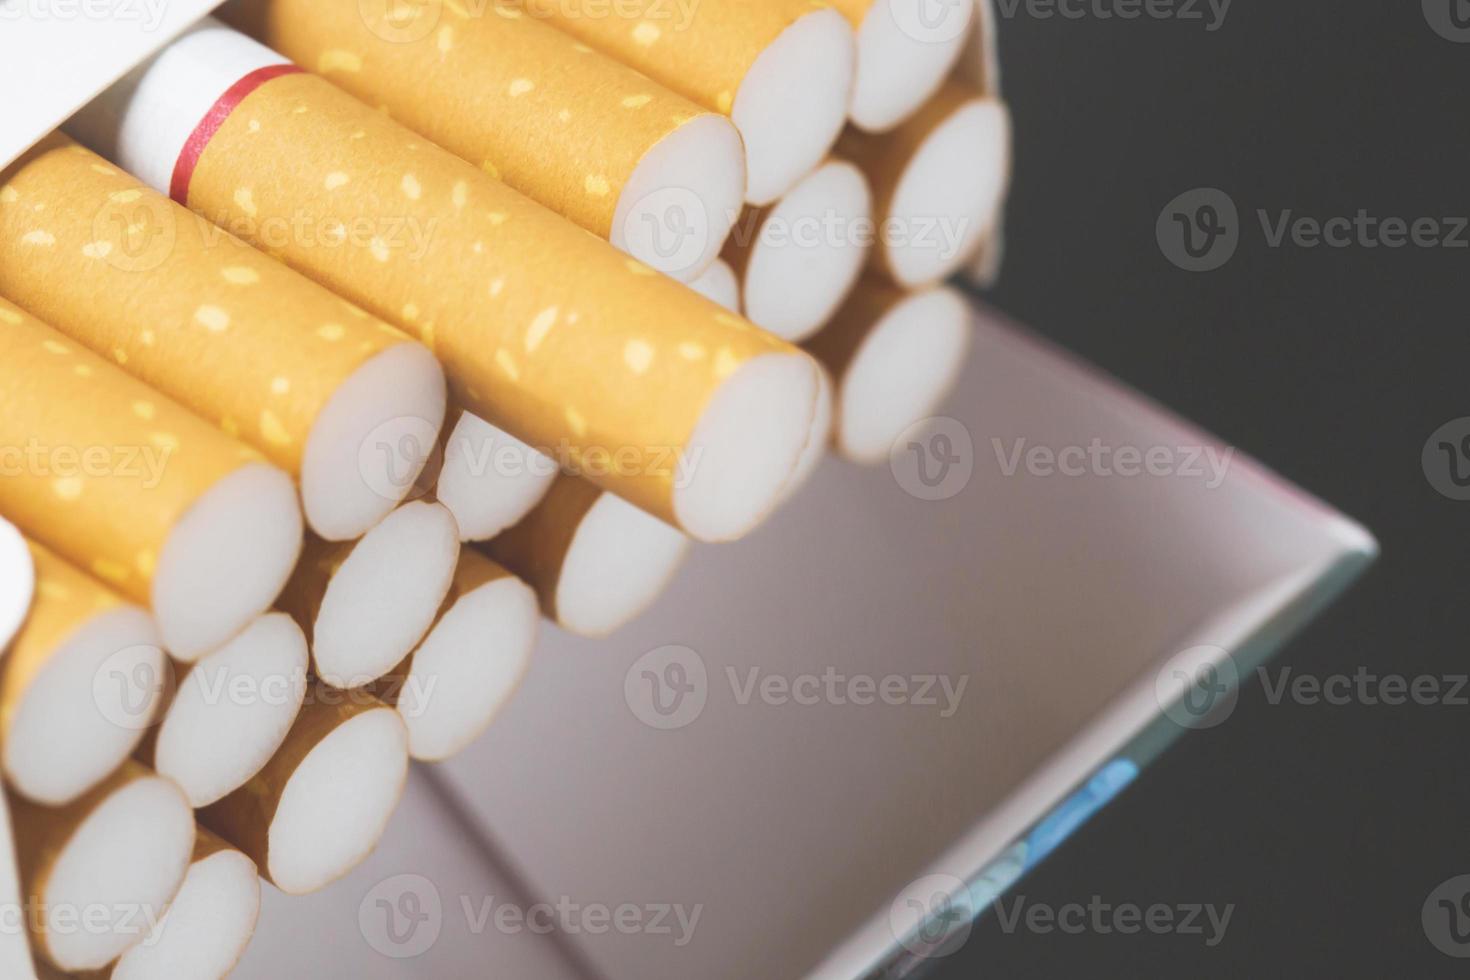 peel it off Cigarette pack prepare smoking a cigarette. Packing line up. photo filters Natural light.